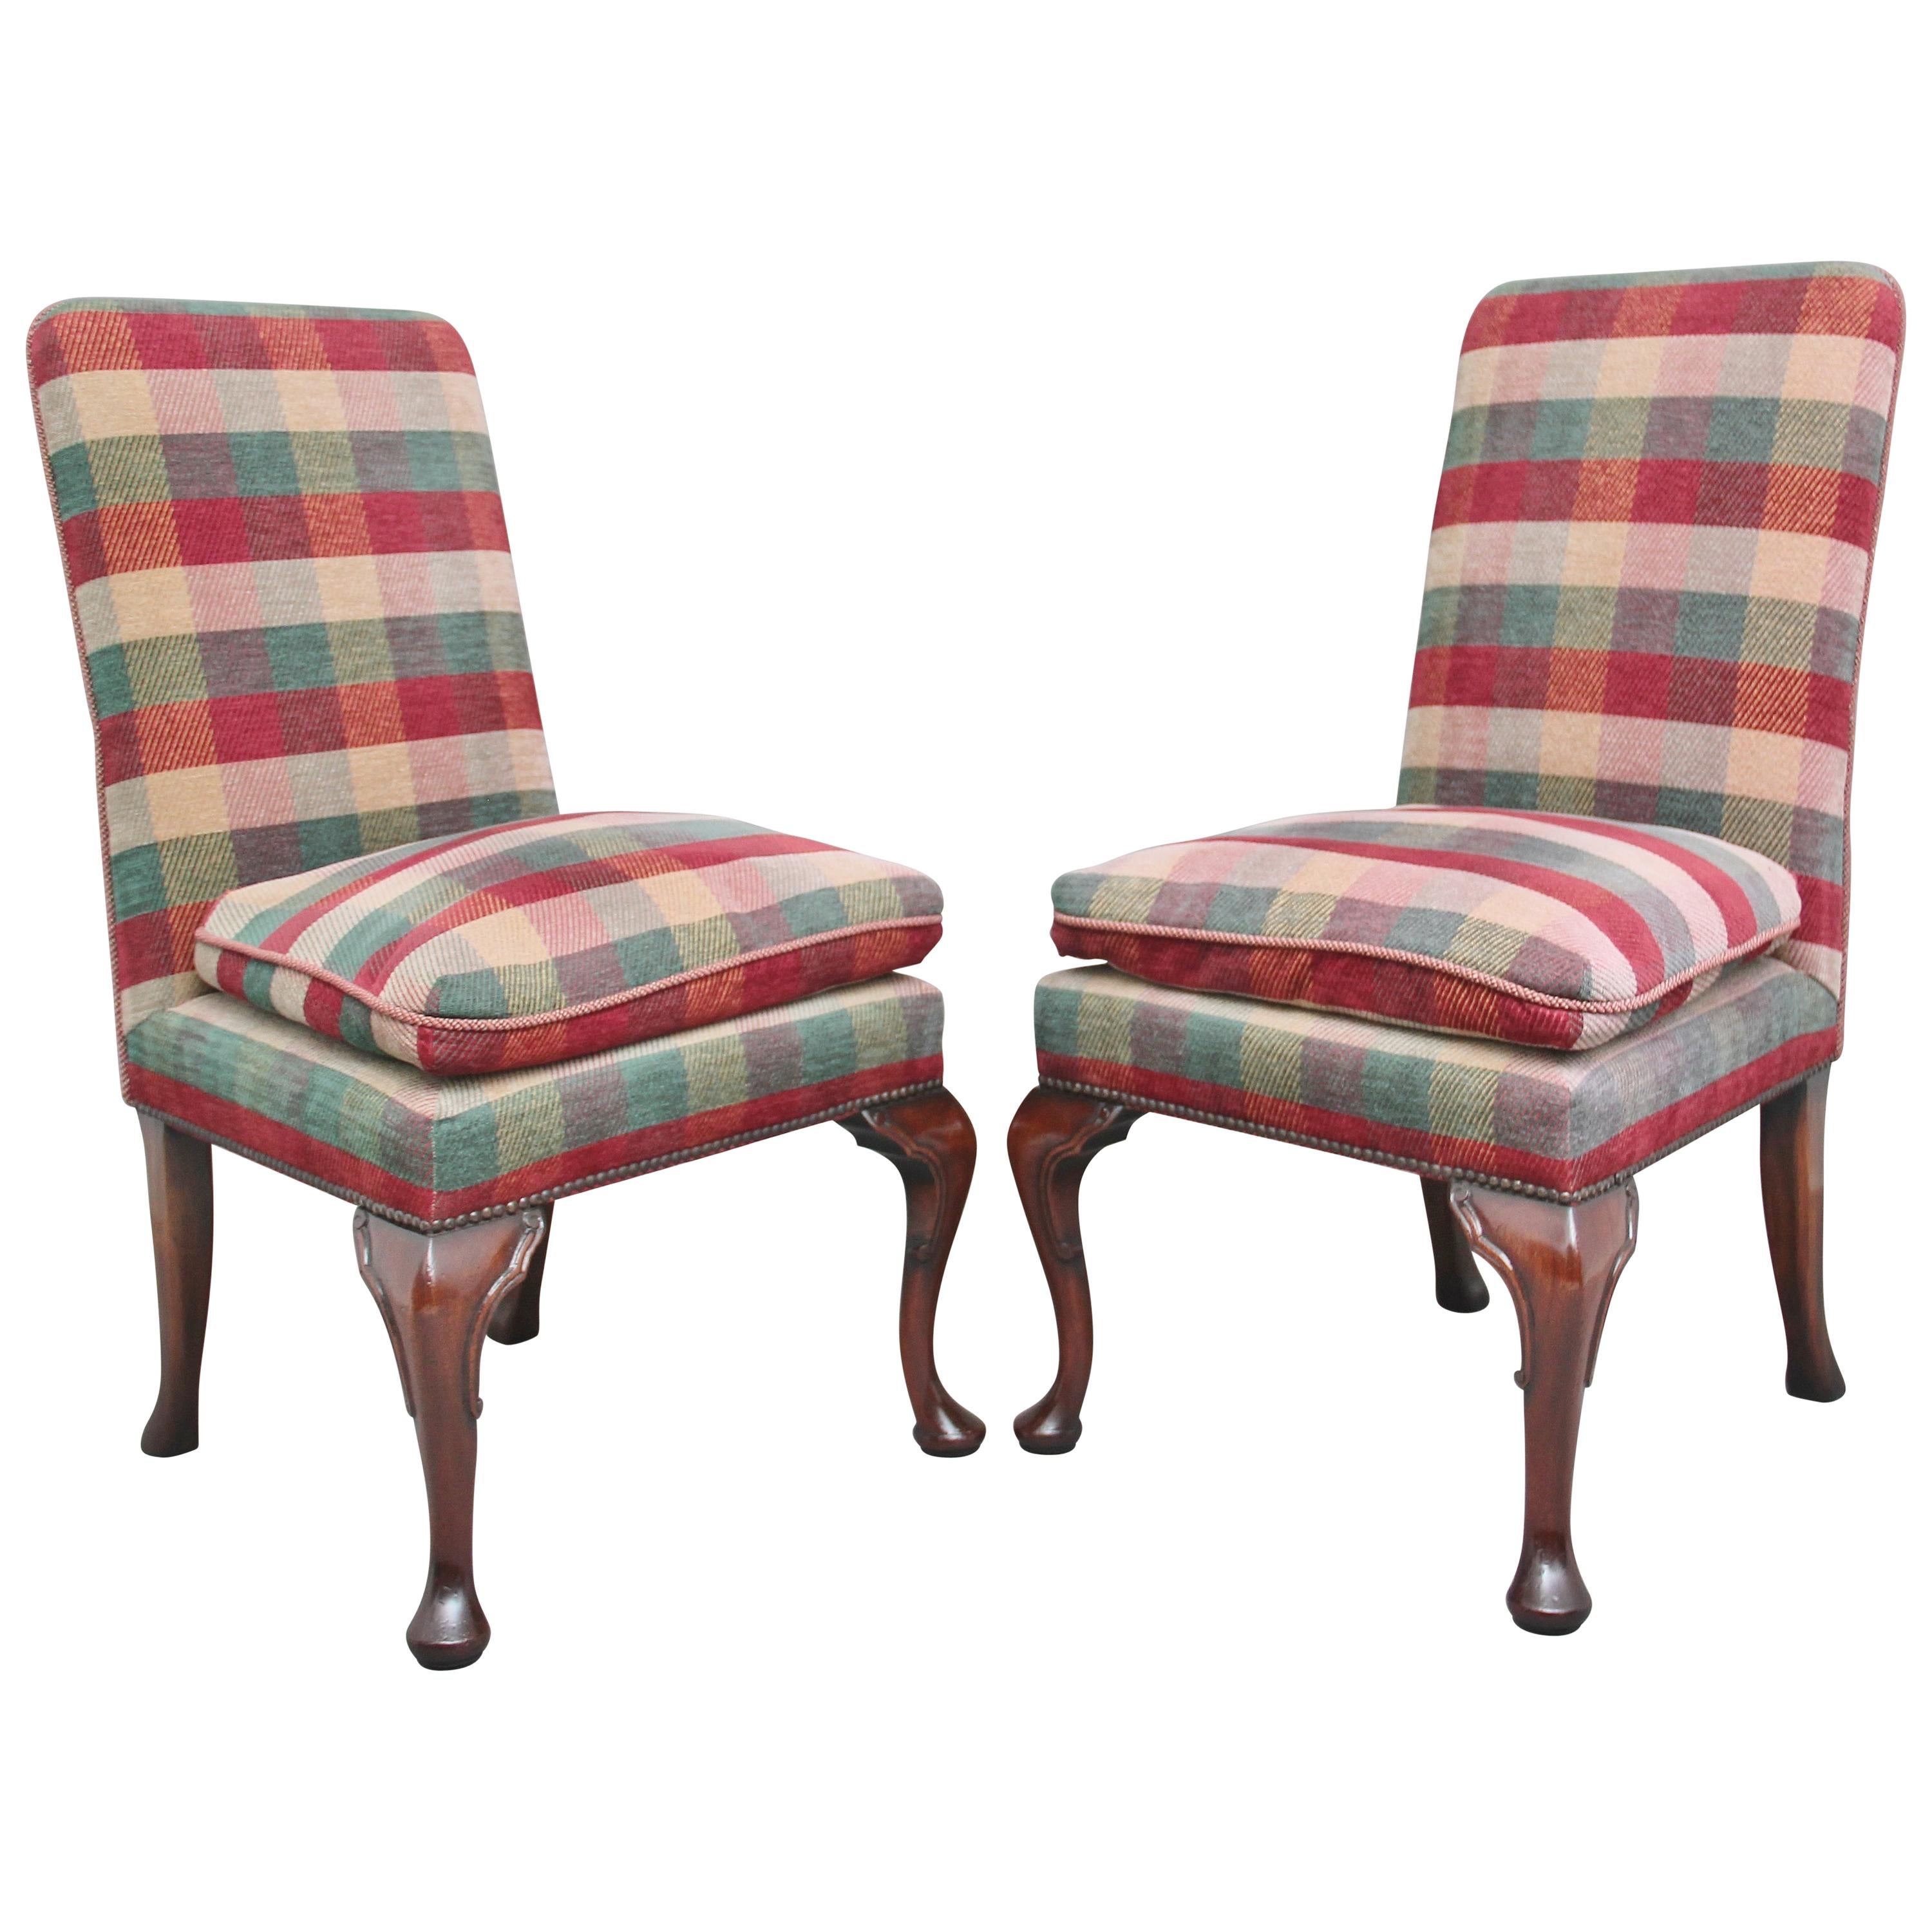 Pair of Upholstered Chairs in the George I Style